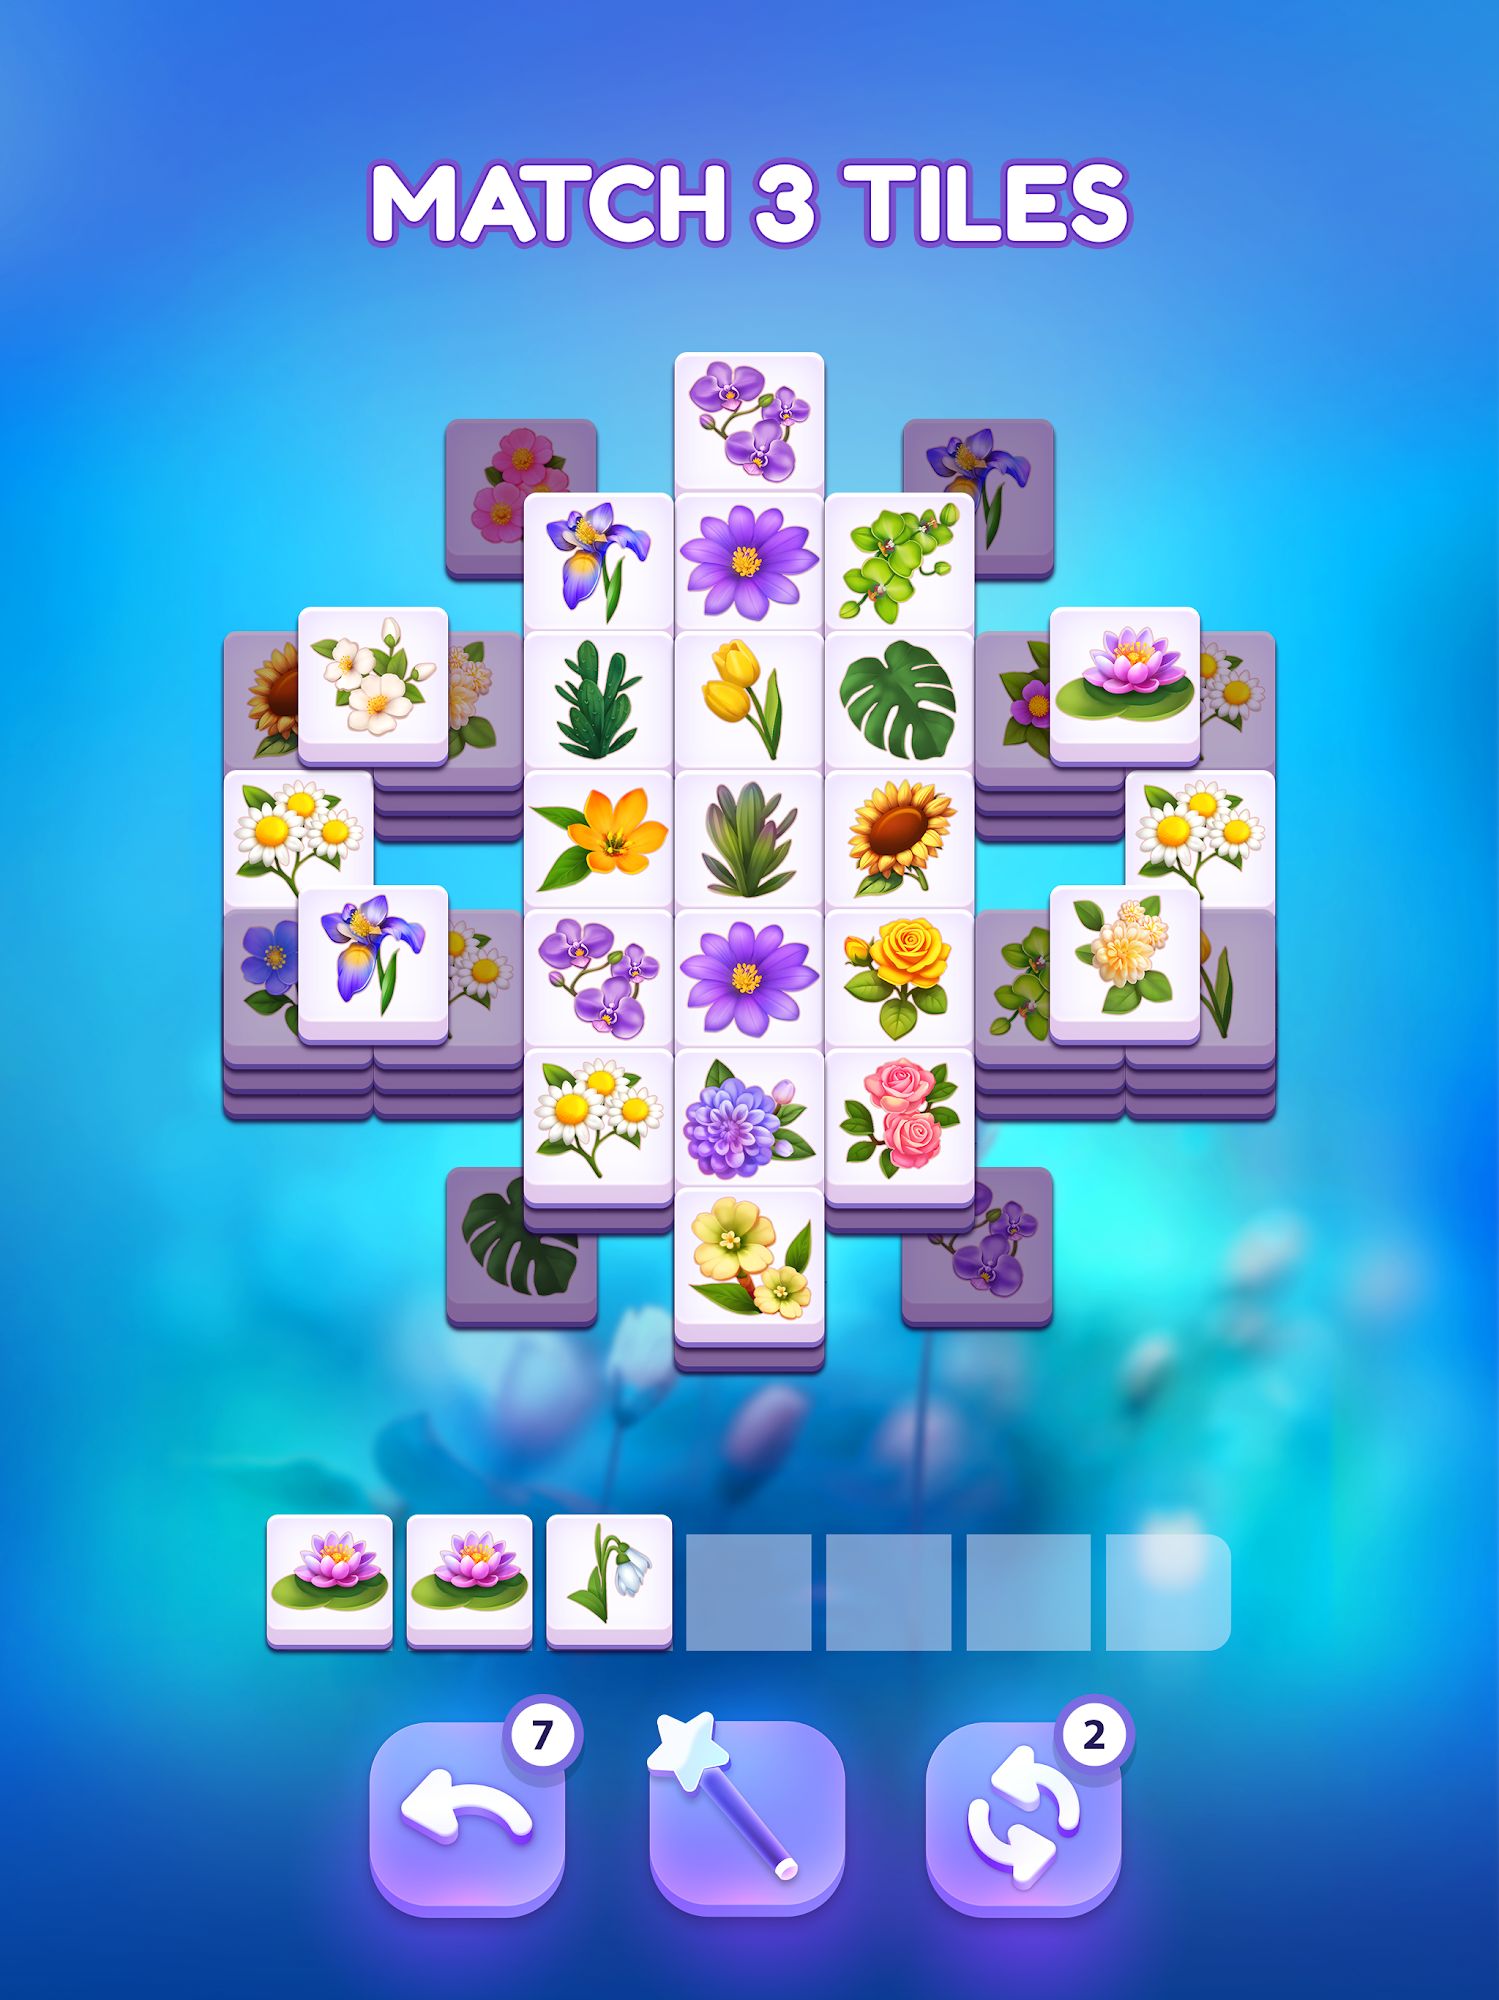 Full version of Android A.n.d.r.o.i.d. .5...0. .a.n.d. .m.o.r.e apk Blossom Match - Puzzle Game for tablet and phone.